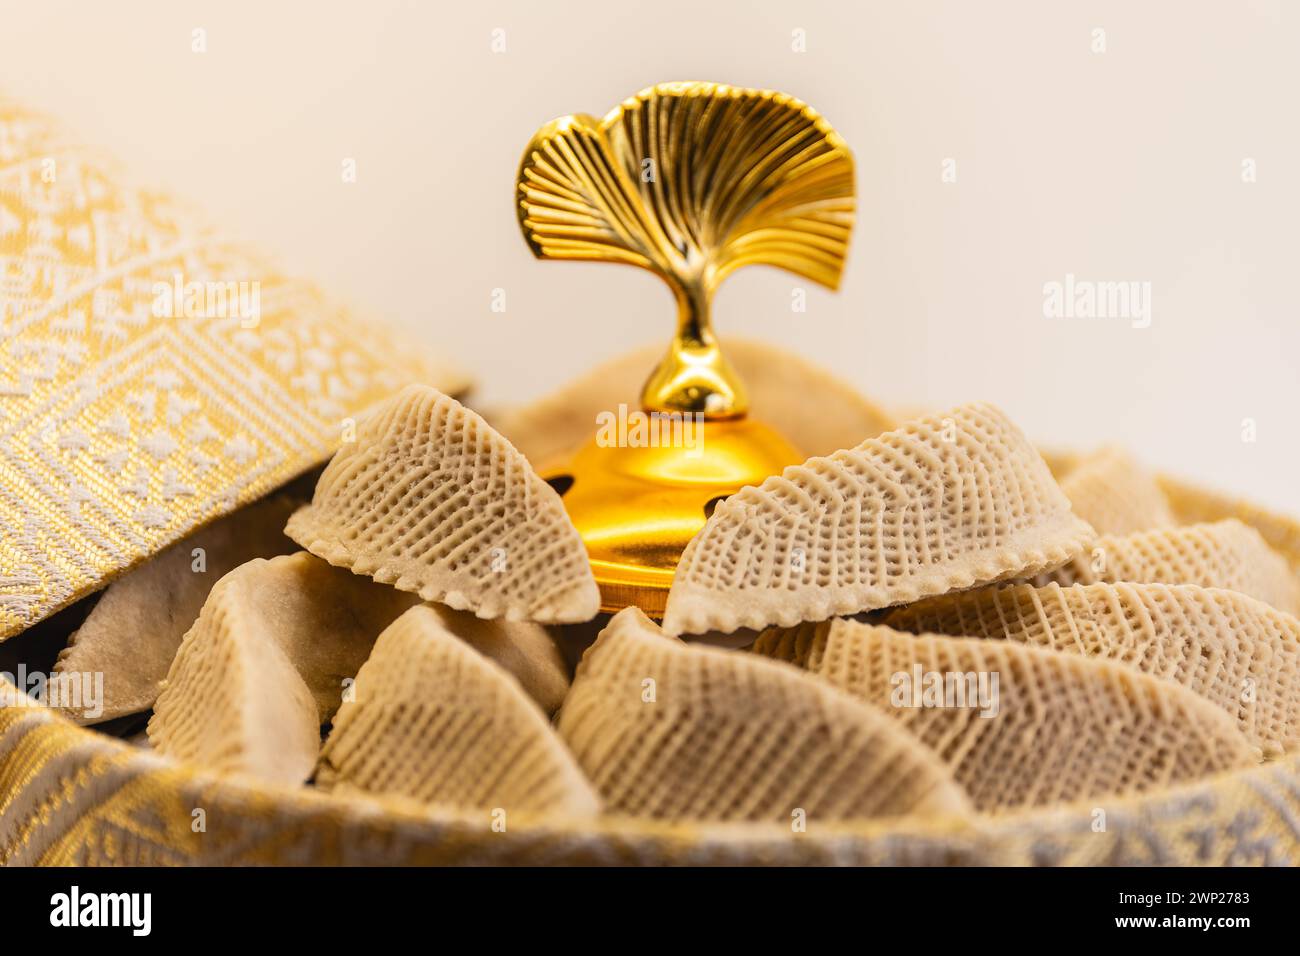 Horizontal photo a gourmet golden dish featuring a distinctive fan-shaped lid, filled with delicate, textured Arabic pastries, set against a soft, lig Stock Photo